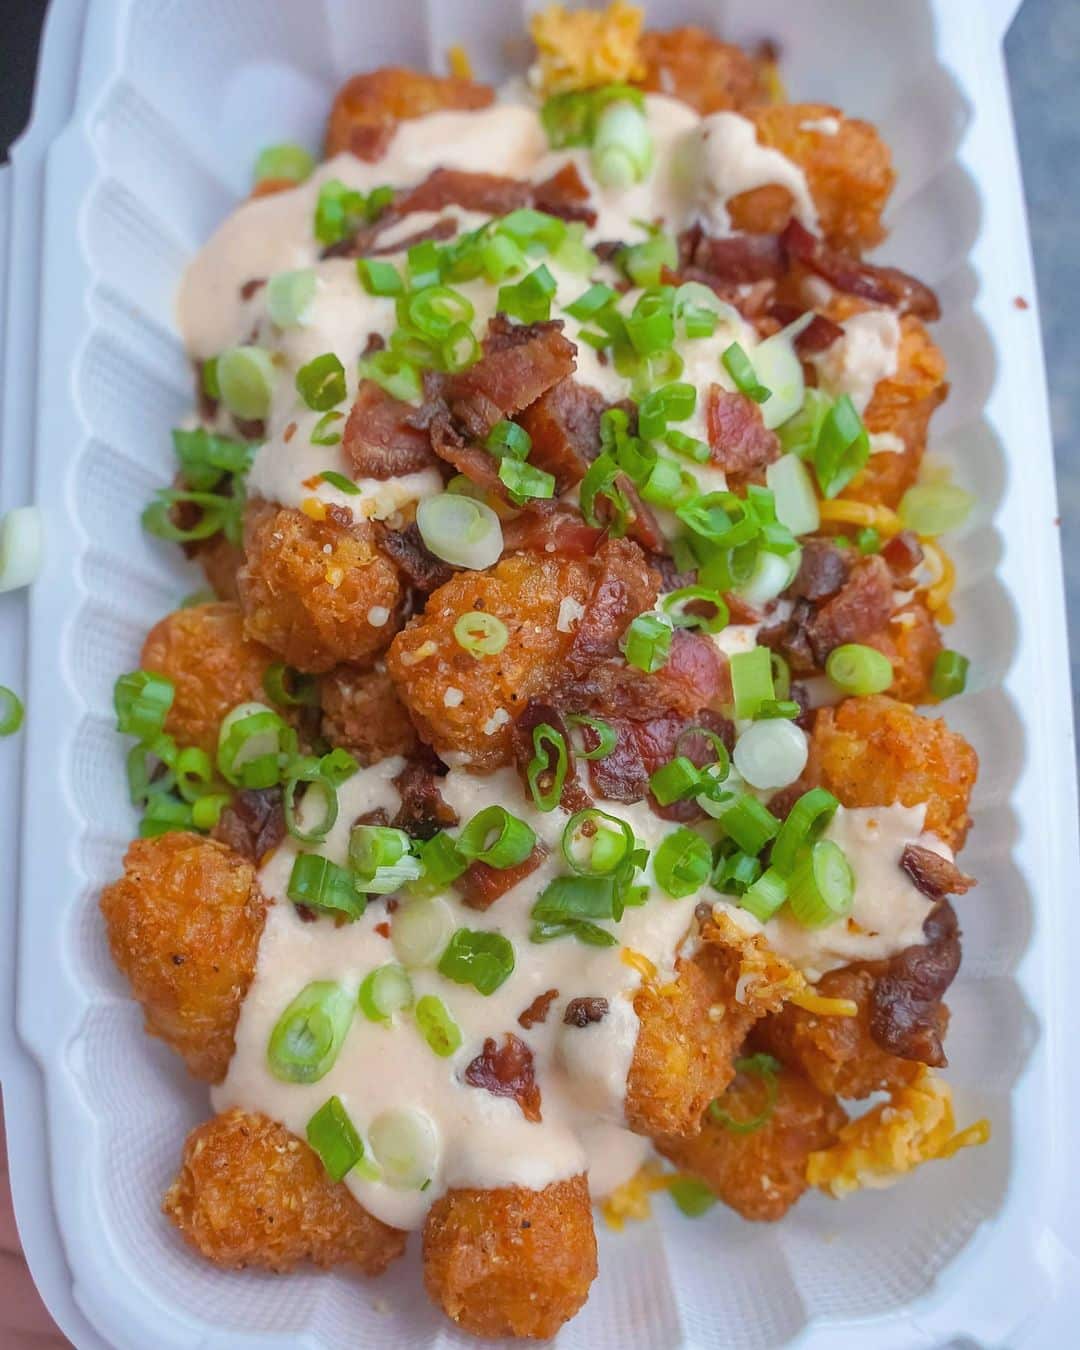 Loaded Tater Tots from Streat Kings Food Truck in NYC